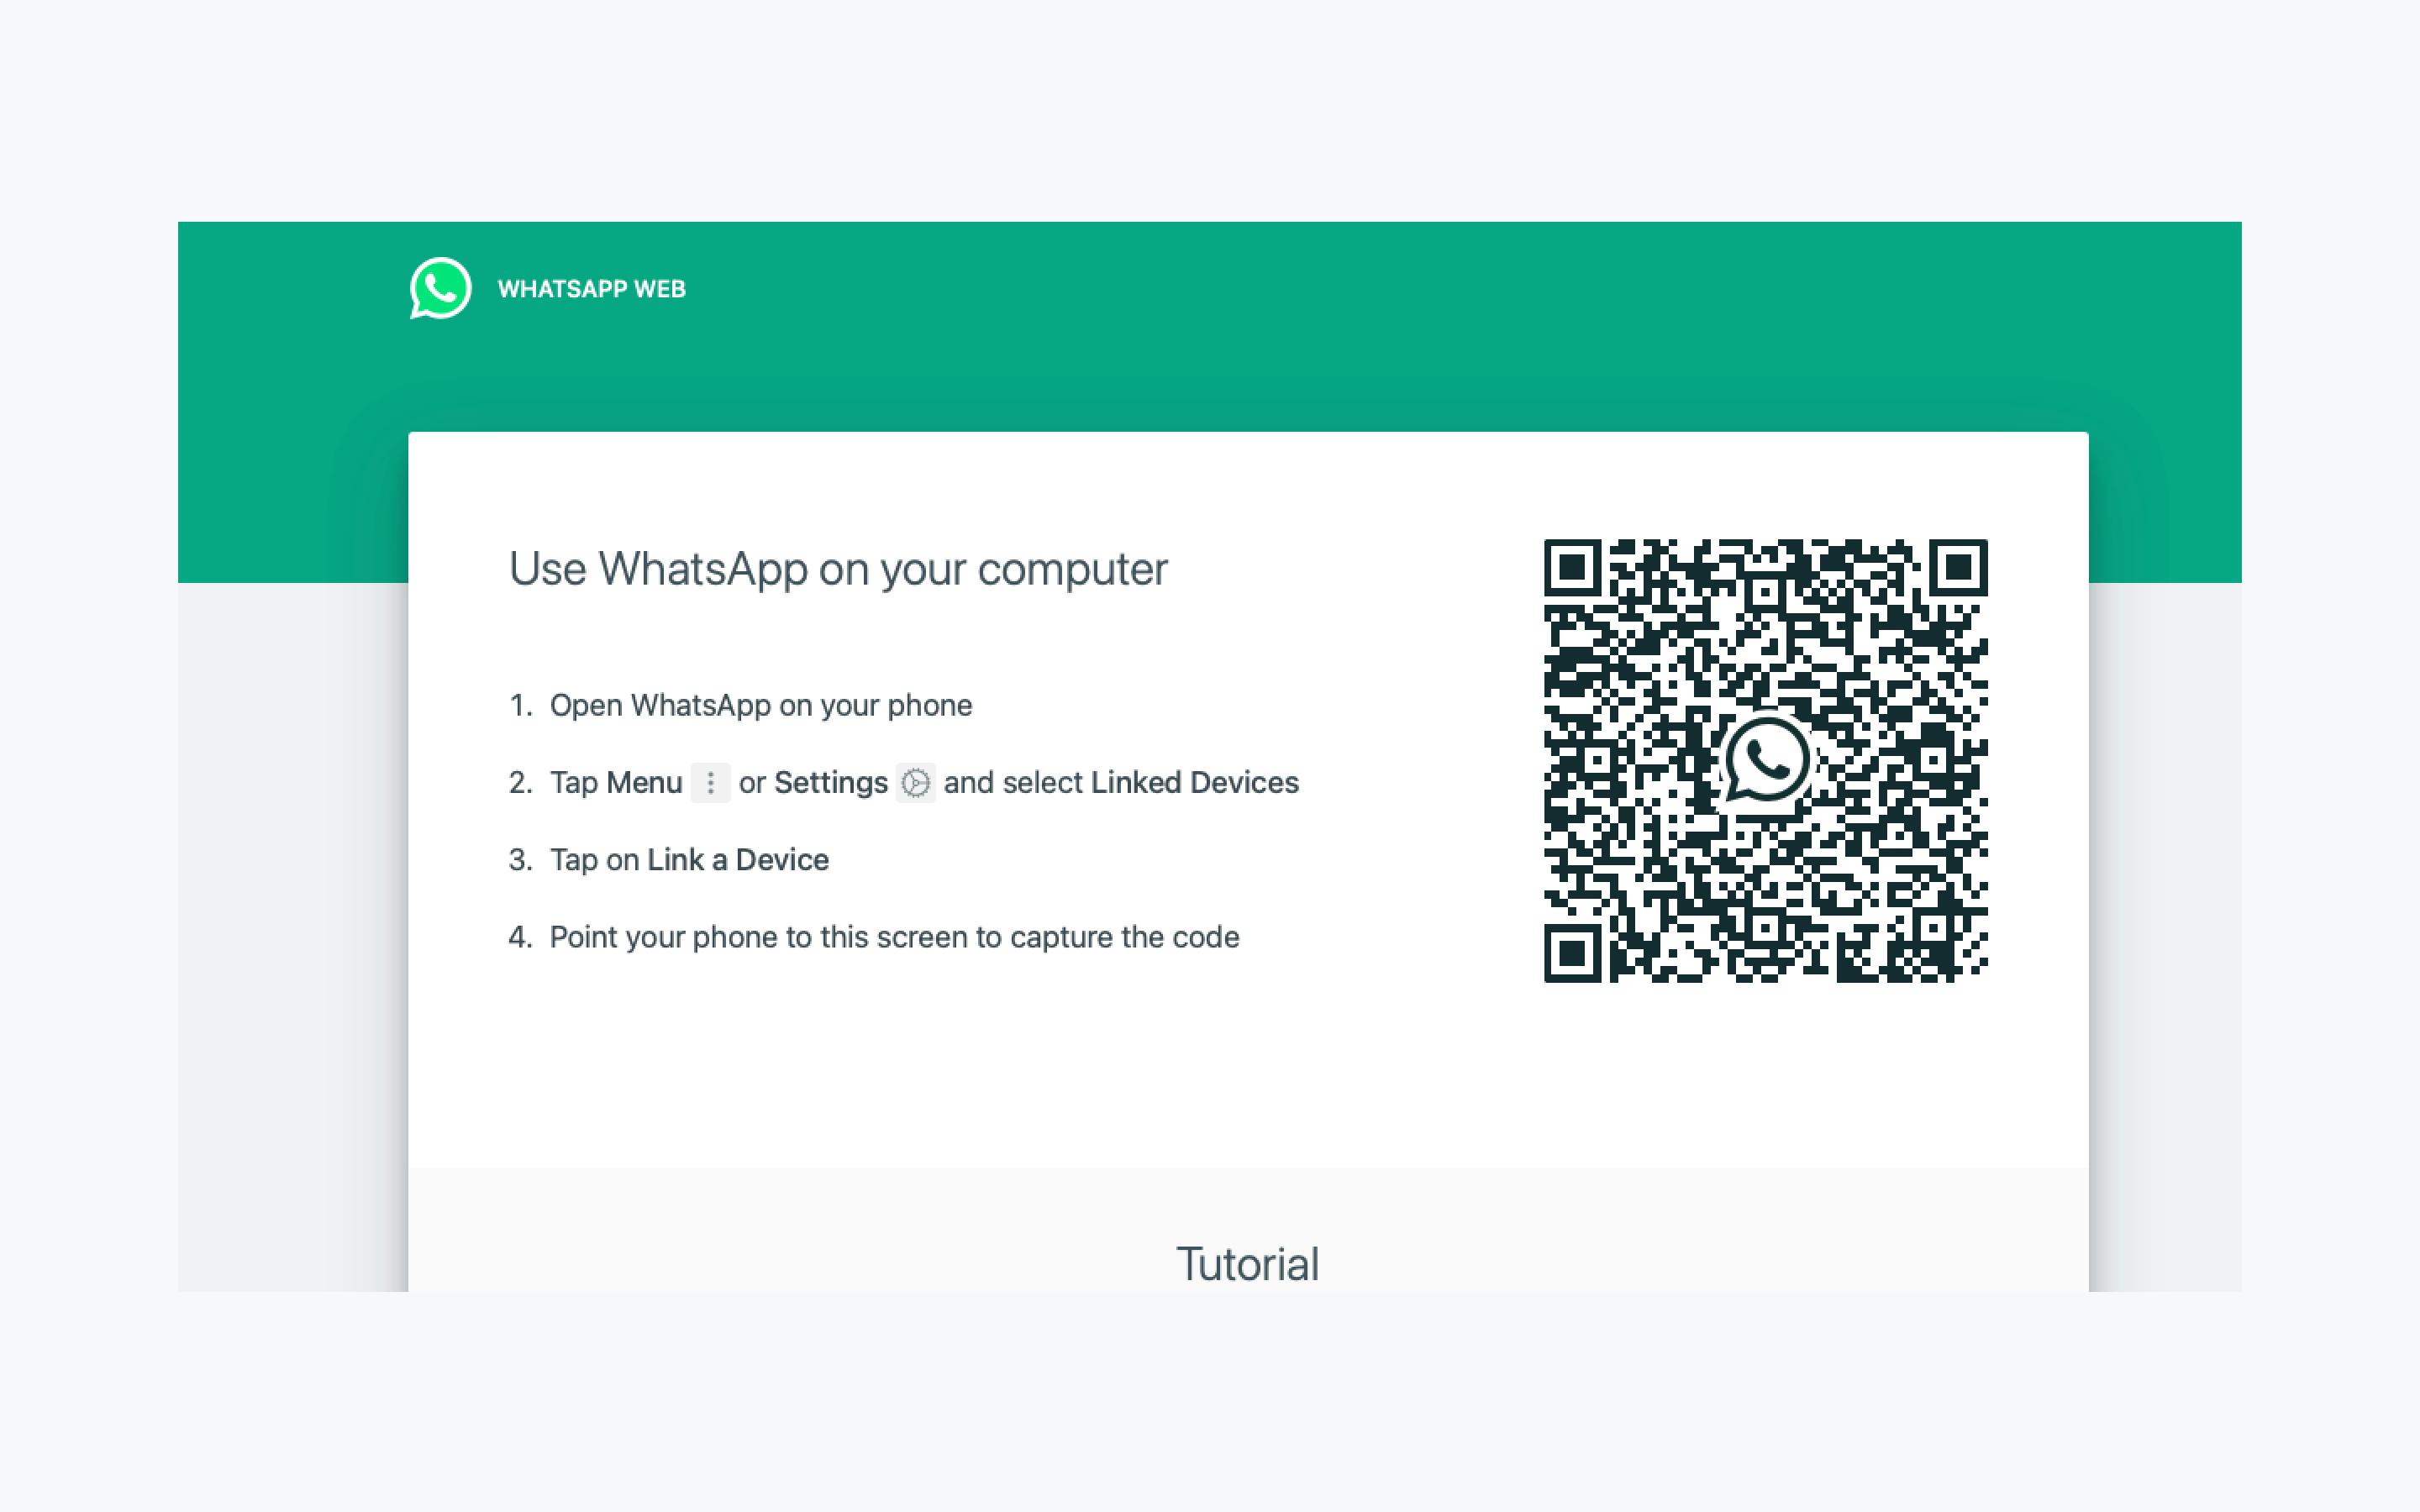 Log in to WhatsApp web with QR